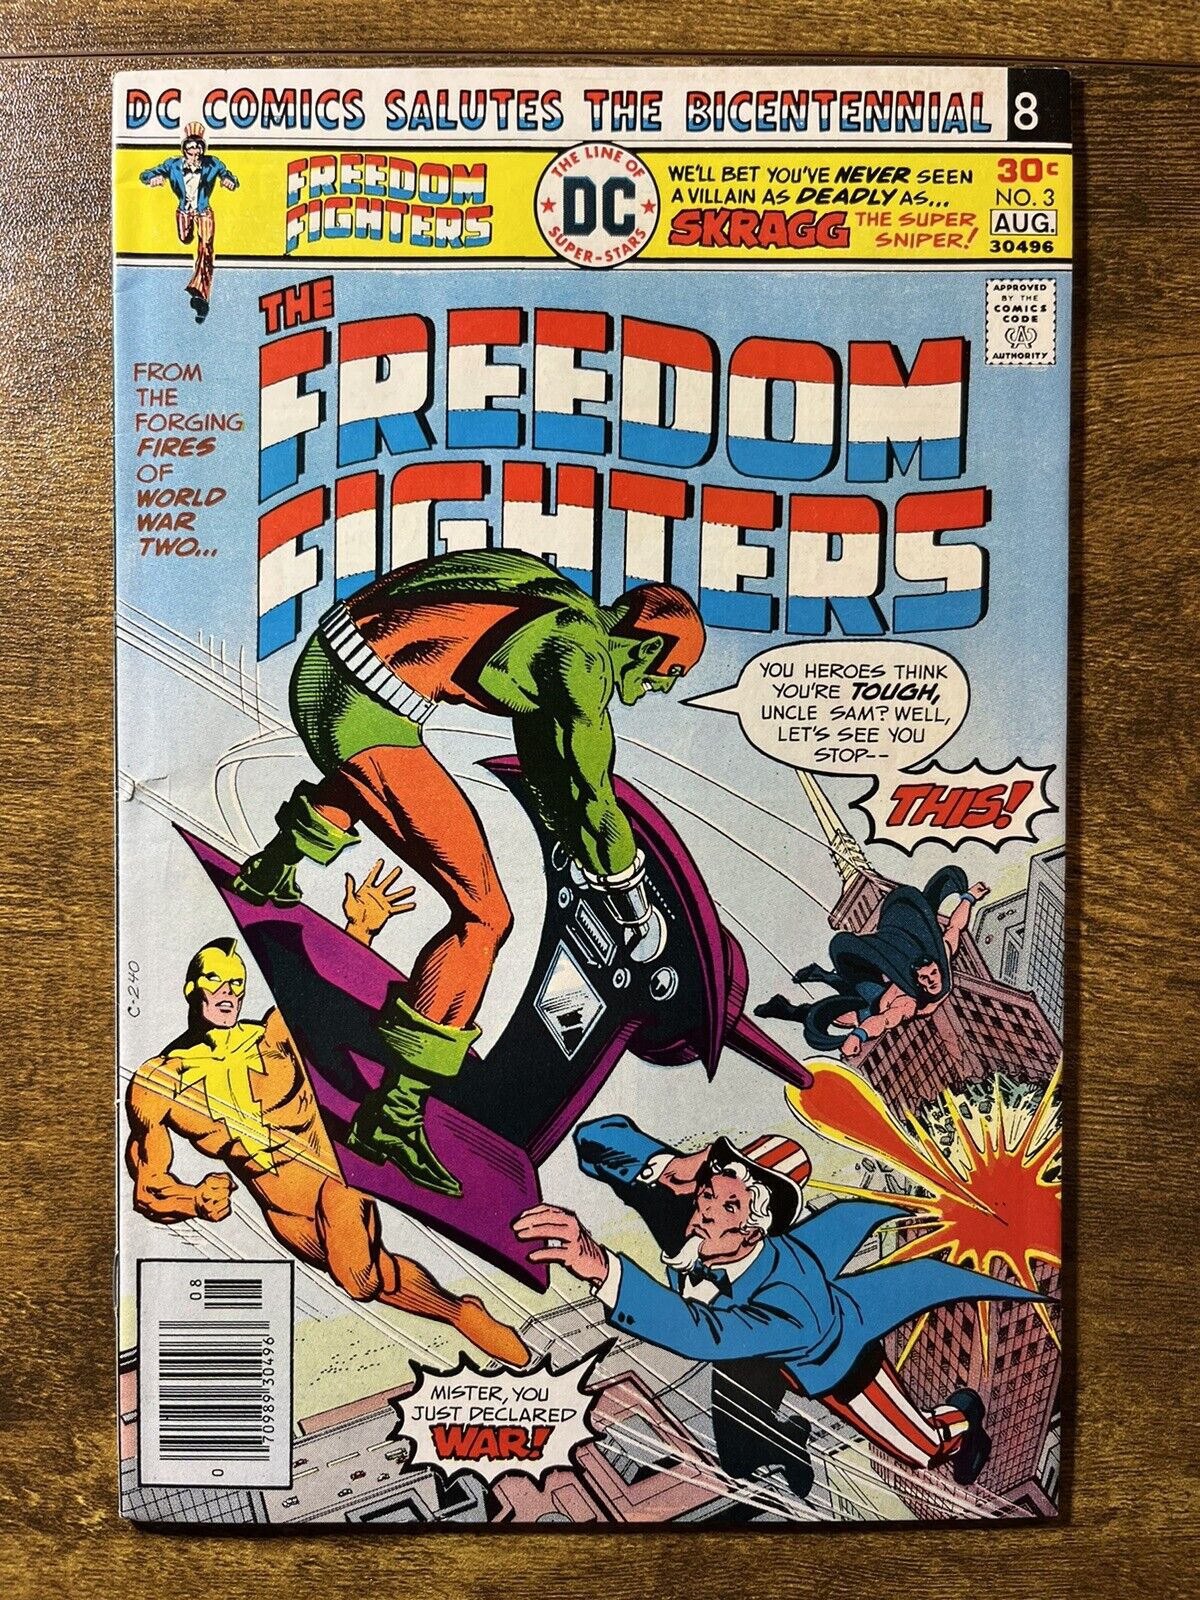 FREEDOM FIGHTERS 3 UNCLE SAM DICK GIORDANO COVER DC COMIC 1976 VINTAGE